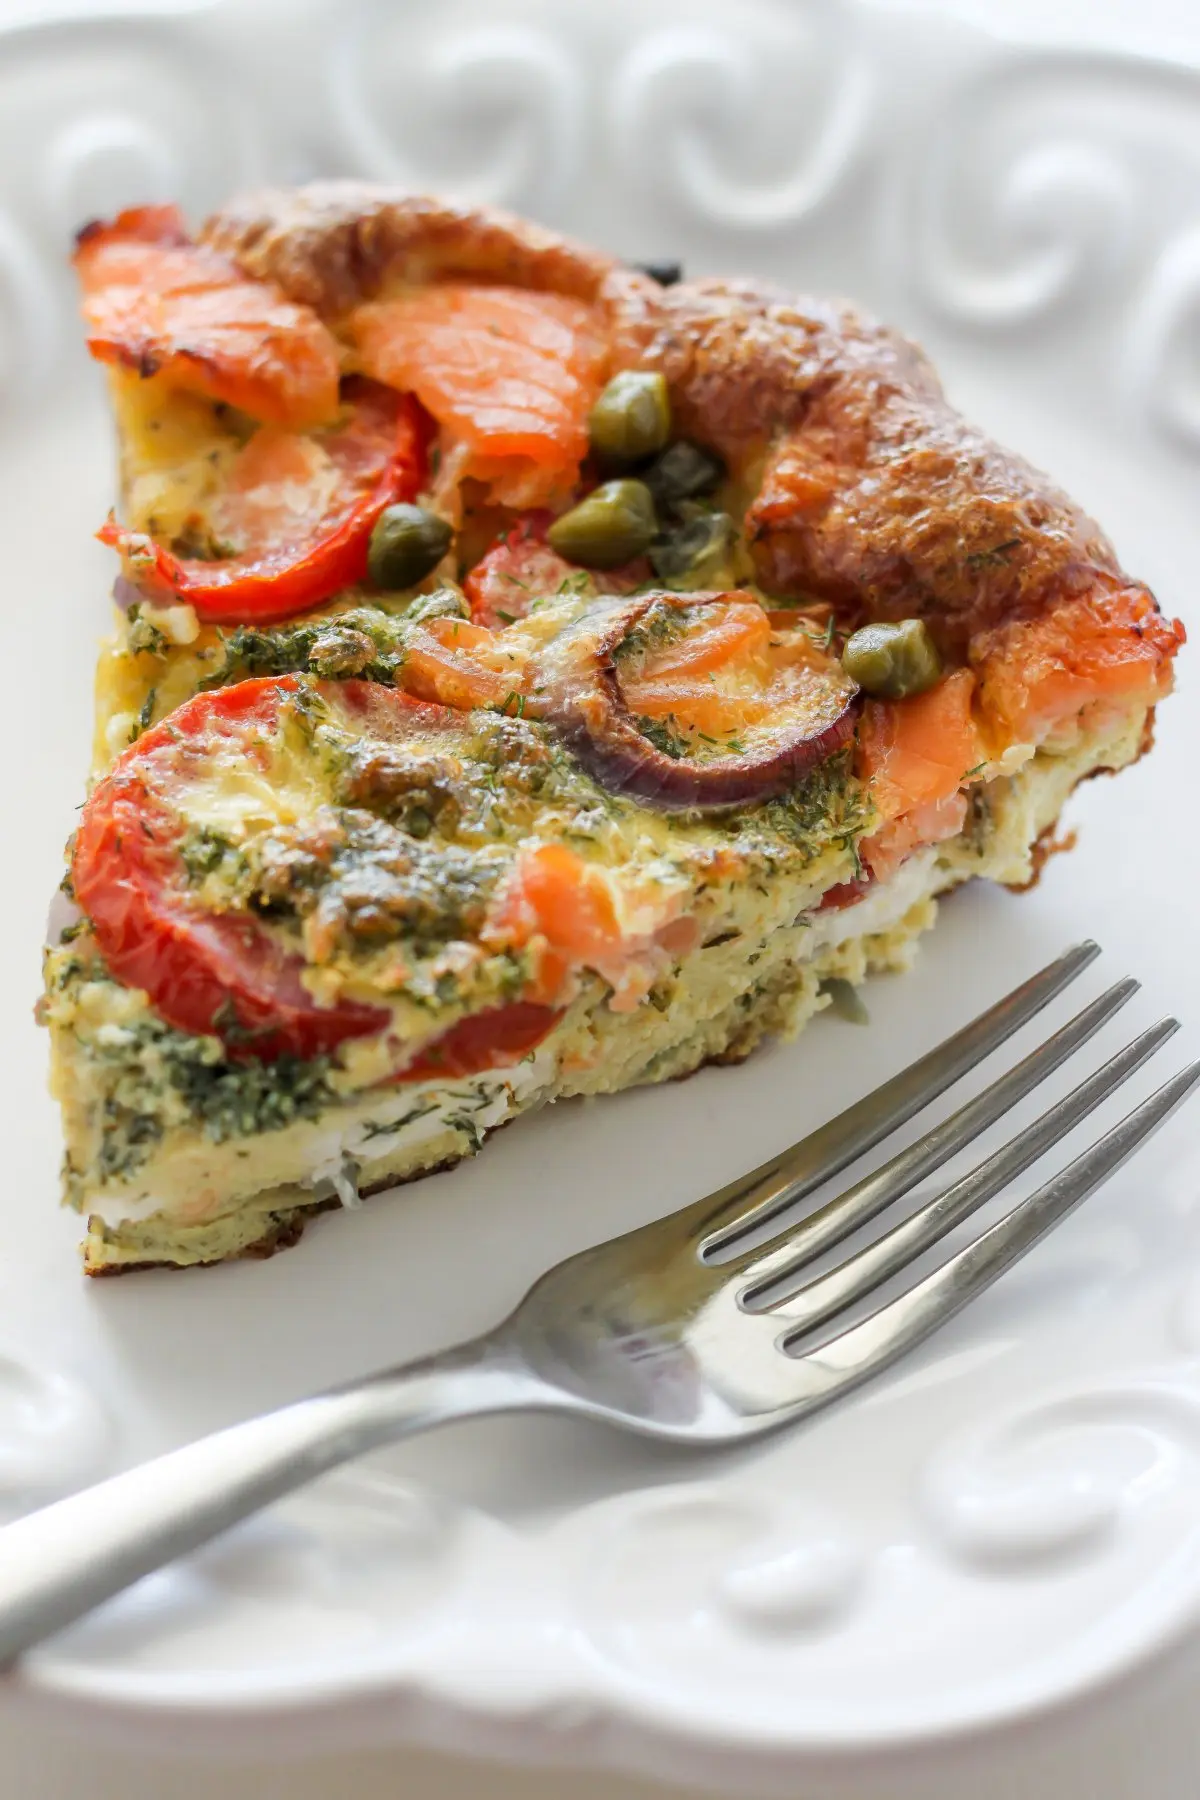 smoked salmon cream cheese frittata - What is a substitute for heavy cream in frittata